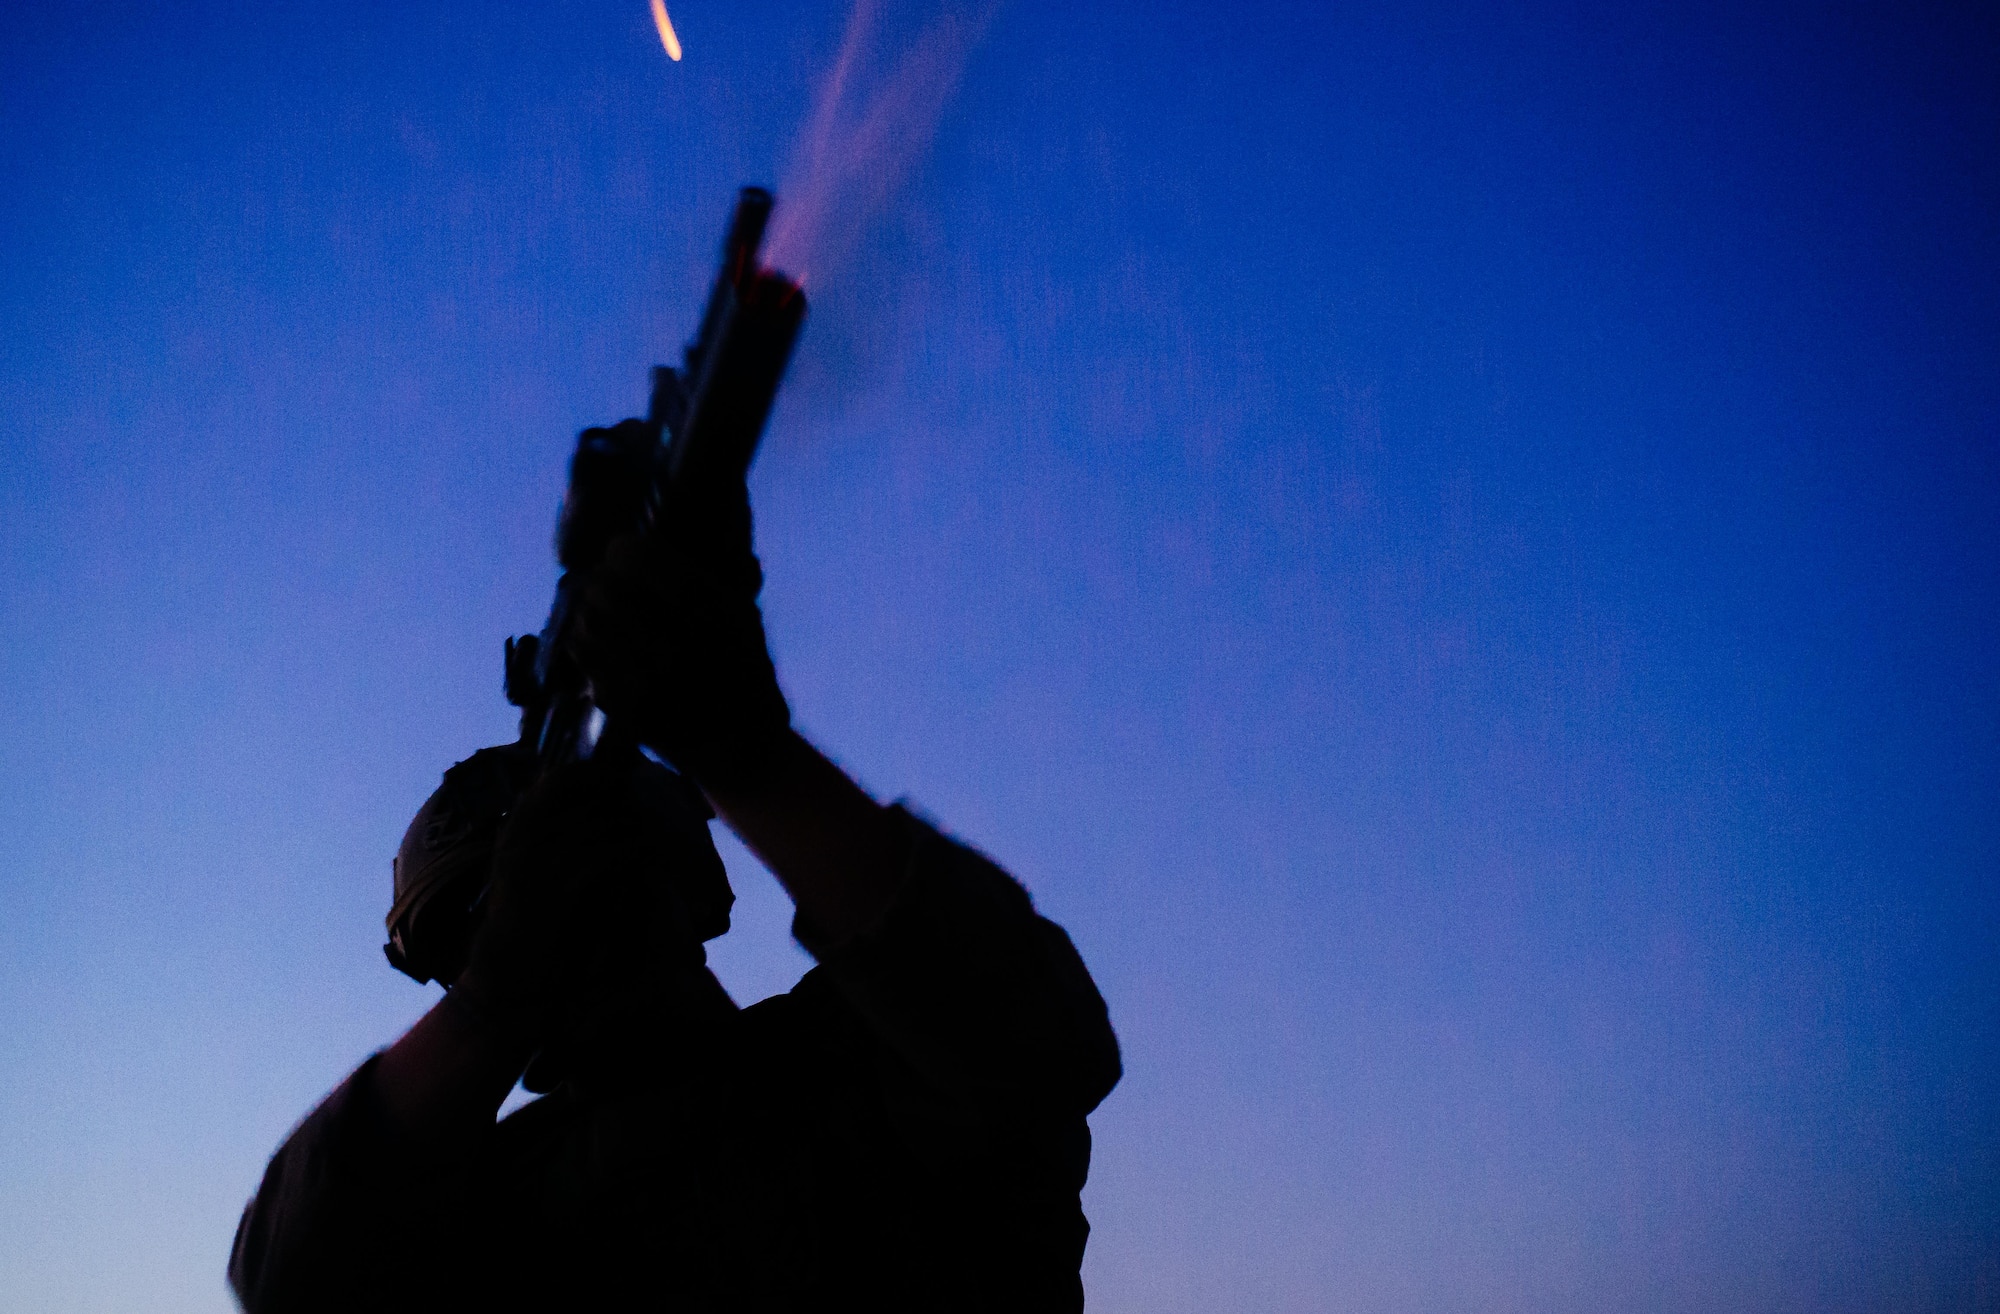 U.S. Air Force Staff Sgt. Steven Armbright, 821st Contingency Response Group first in security team member, fires a flare from a defensive fighting position while on perimeter watch at Qayyarah West Airfield, Iraq, Nov. 17, 2016. The 821st CRG is highly-specialized in training and rapidly deploying personnel to quickly open airfields and establish, expand, sustain and coordinate air mobility operations in austere, bare-base conditions. (U.S. Air Force photo by Senior Airman Jordan Castelan)